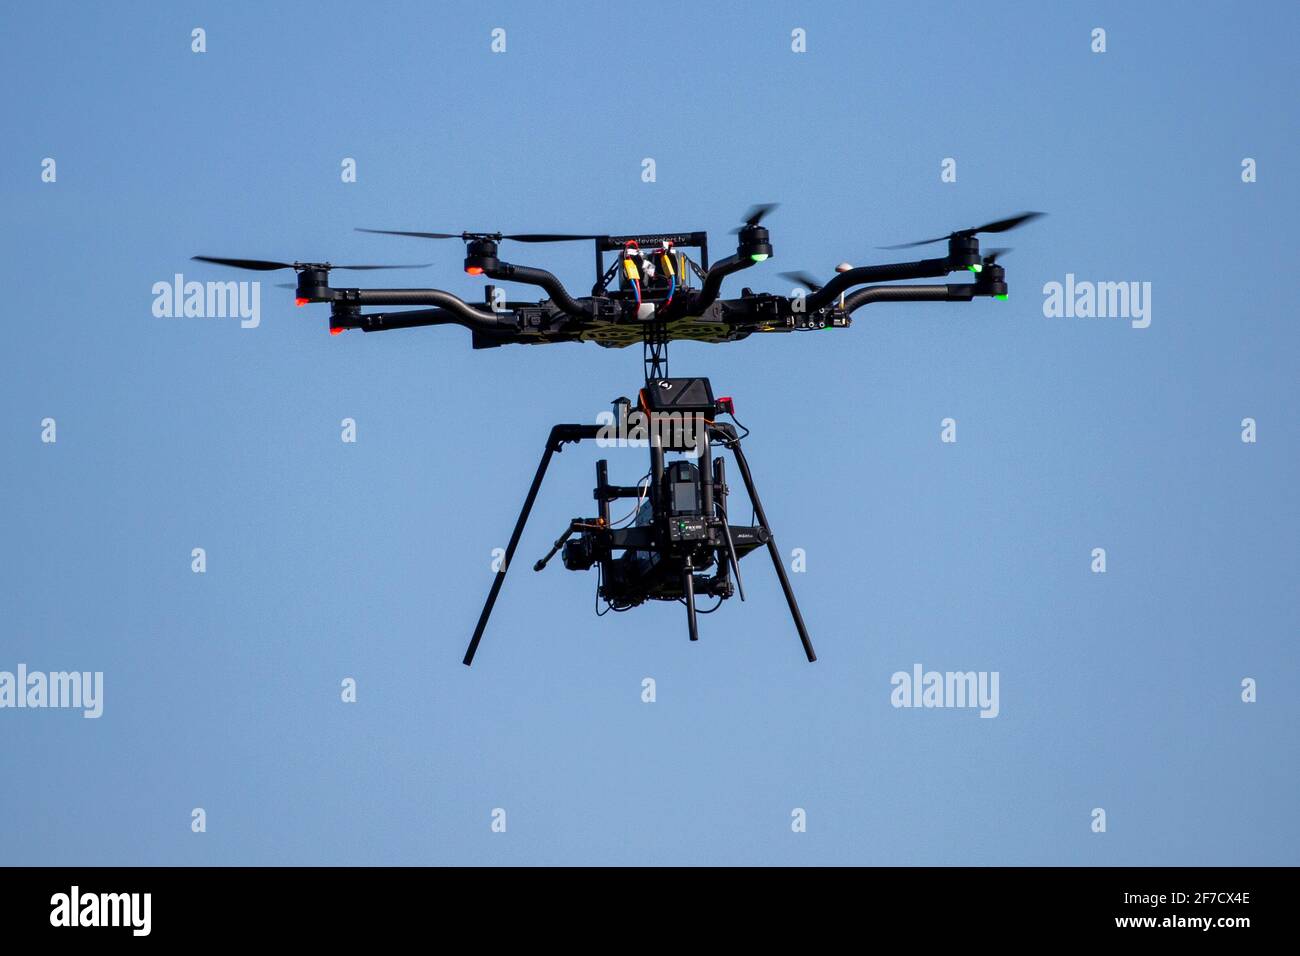 Stock picture of a Octocopter drone  (multirotor aircraft ) used to film the 2021 Boat Race on the River Great Ouse in Ely,Cambridgeshire. between Cambridge and Oxford University  The drone has 8 motors and propellers. Stock Photo